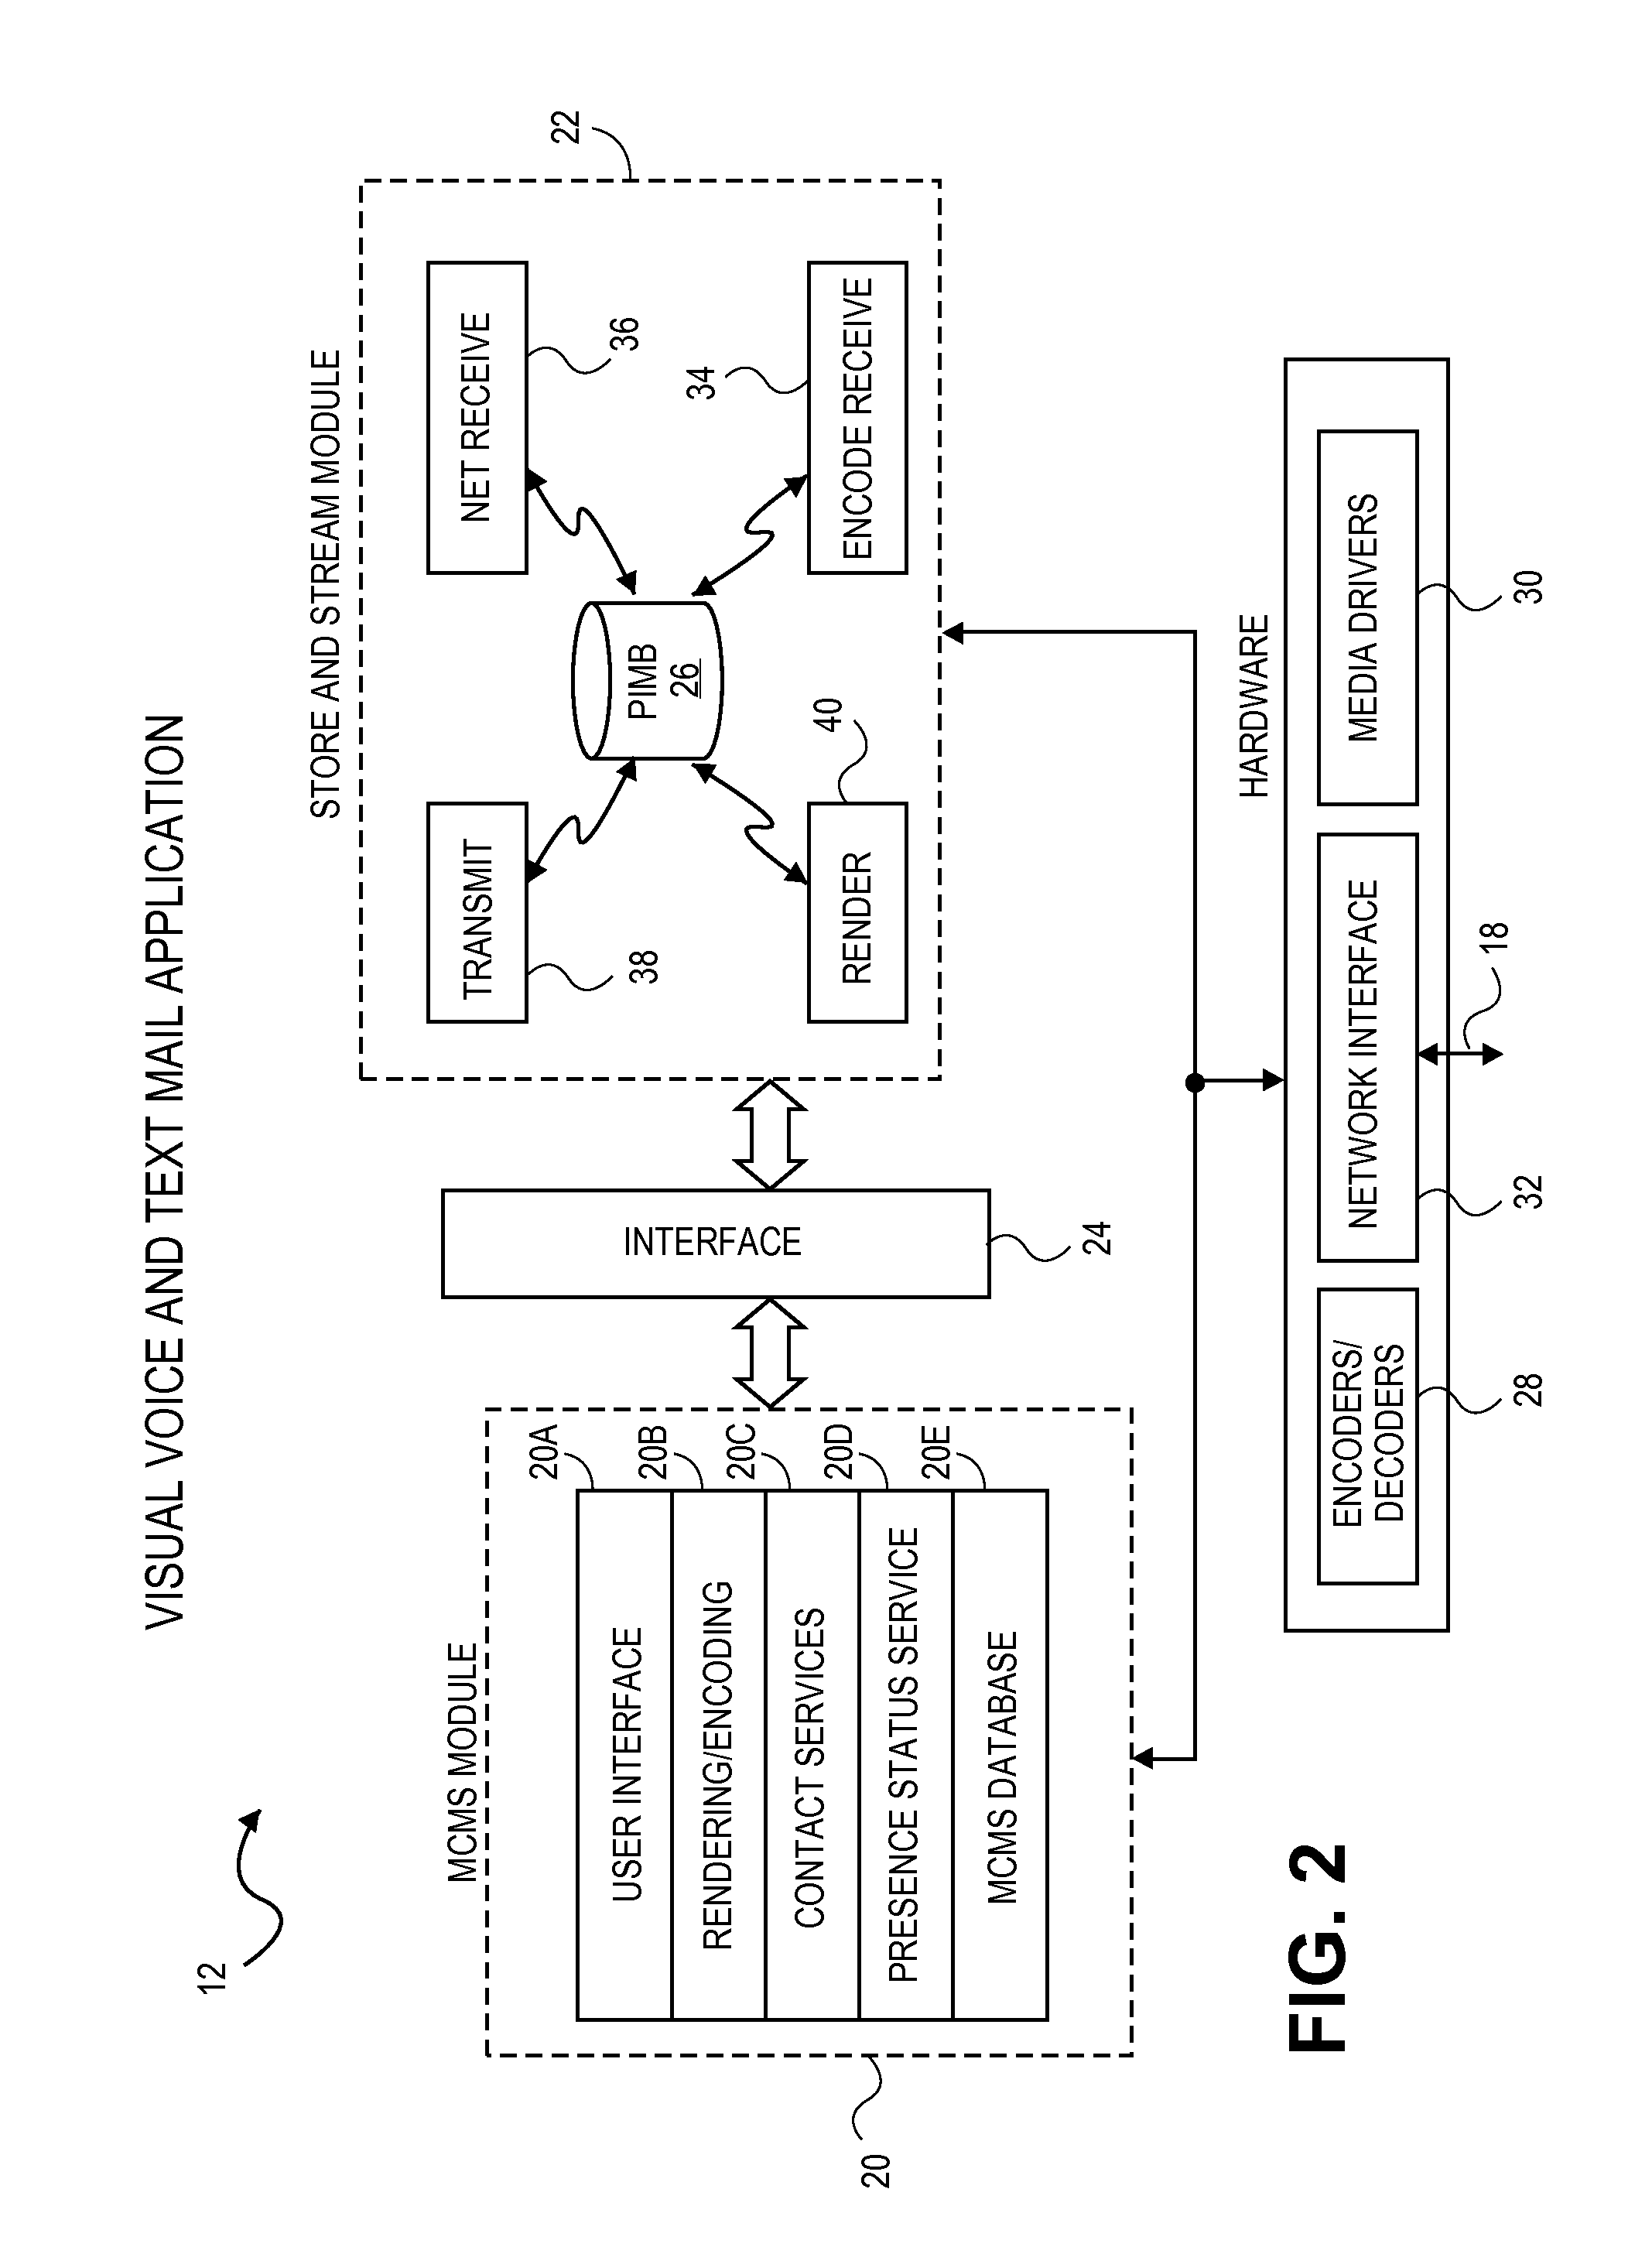 Voice and text mail application for communication devices